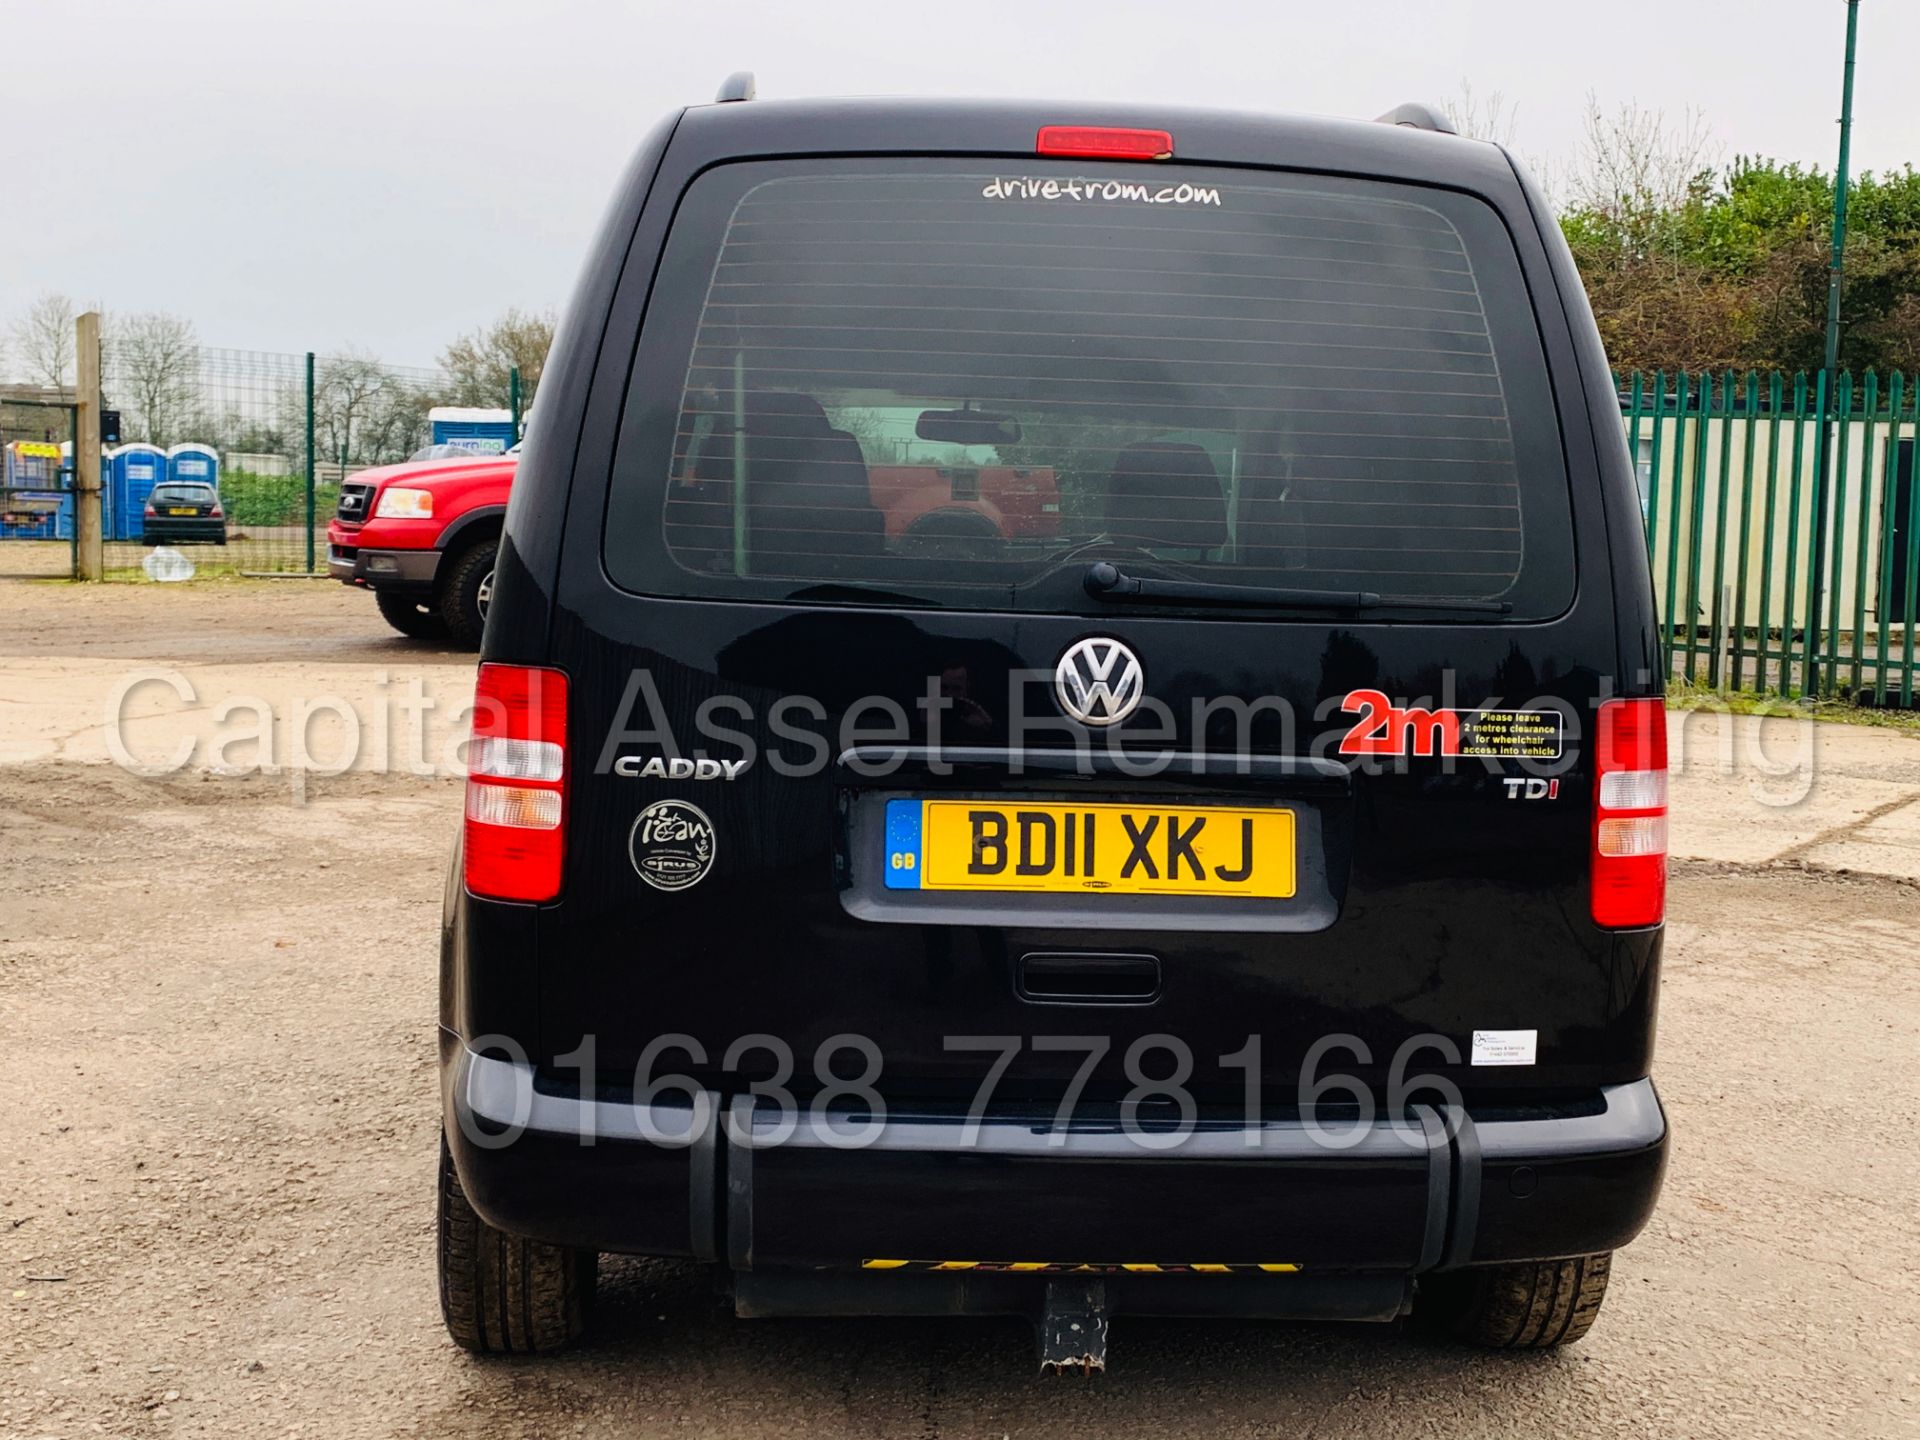 VOLKSWAGEN CADDY C20 *LIFE* DISABILITY ACCESS /WAV (2011) '1.6 TDI - AUTO' *A/C* (35,000 MILES ONLY) - Image 7 of 41